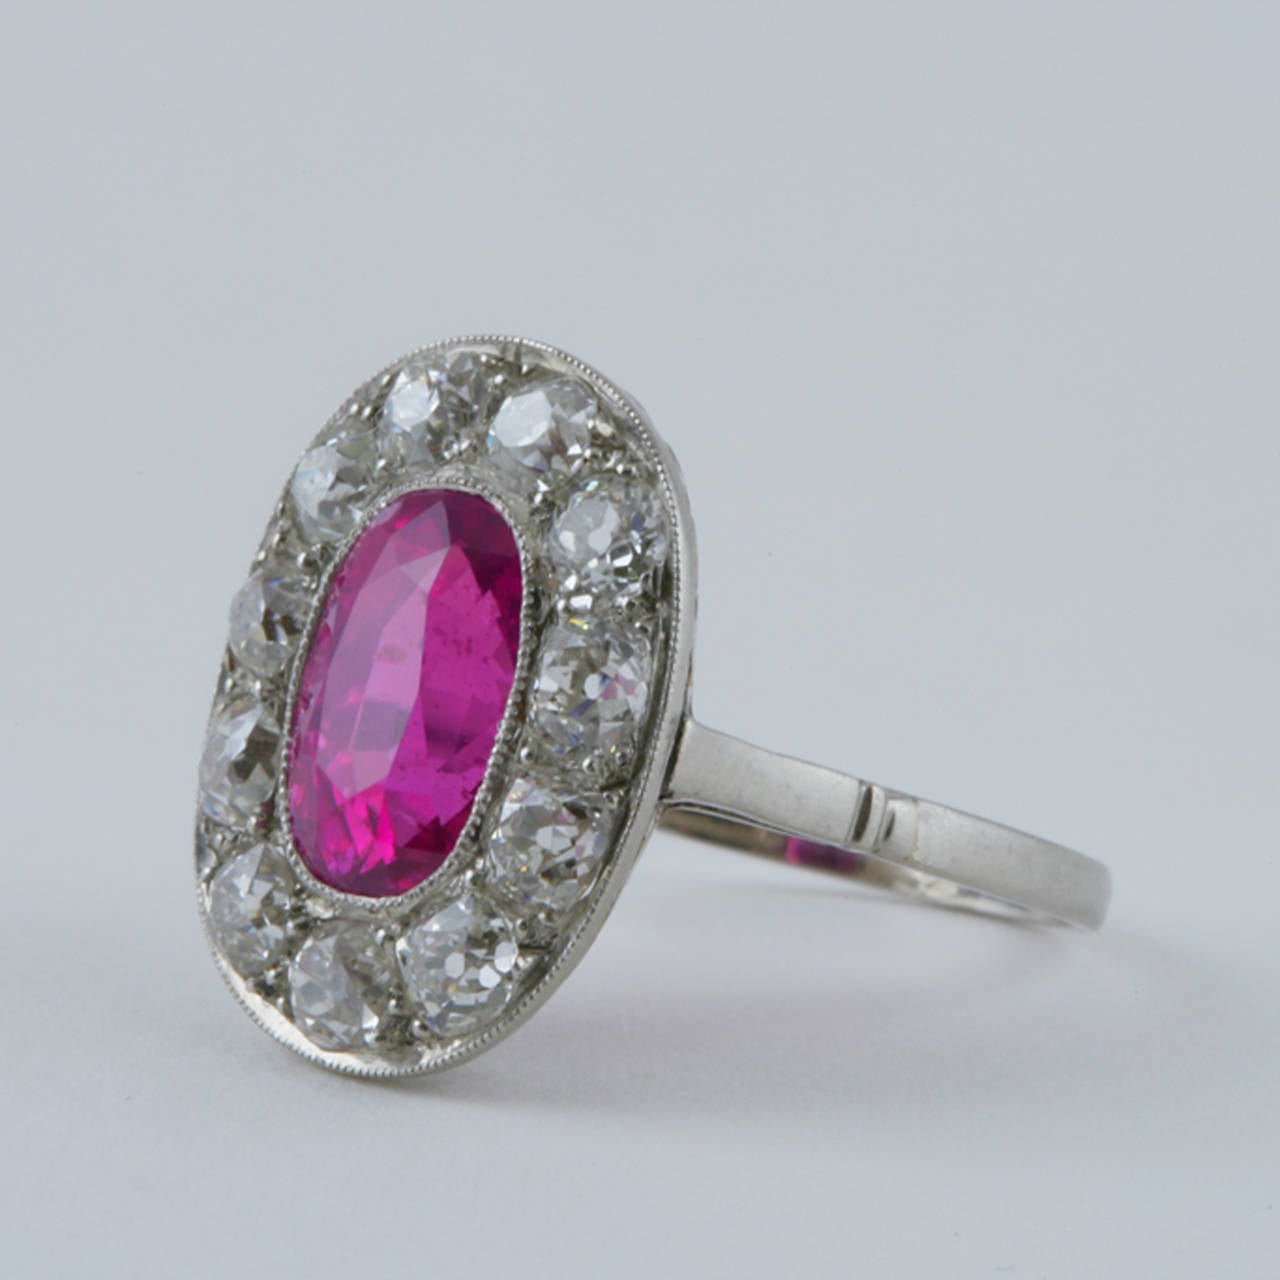 This Belle Époque French ring features a nearly four-carat vivid pink Ceylon sapphire, framed by a halo of fiery old mine-cut diamonds. The pink sapphire’s brilliance is ideally showcased by the delicate platinum work of the bezel, and scrolling